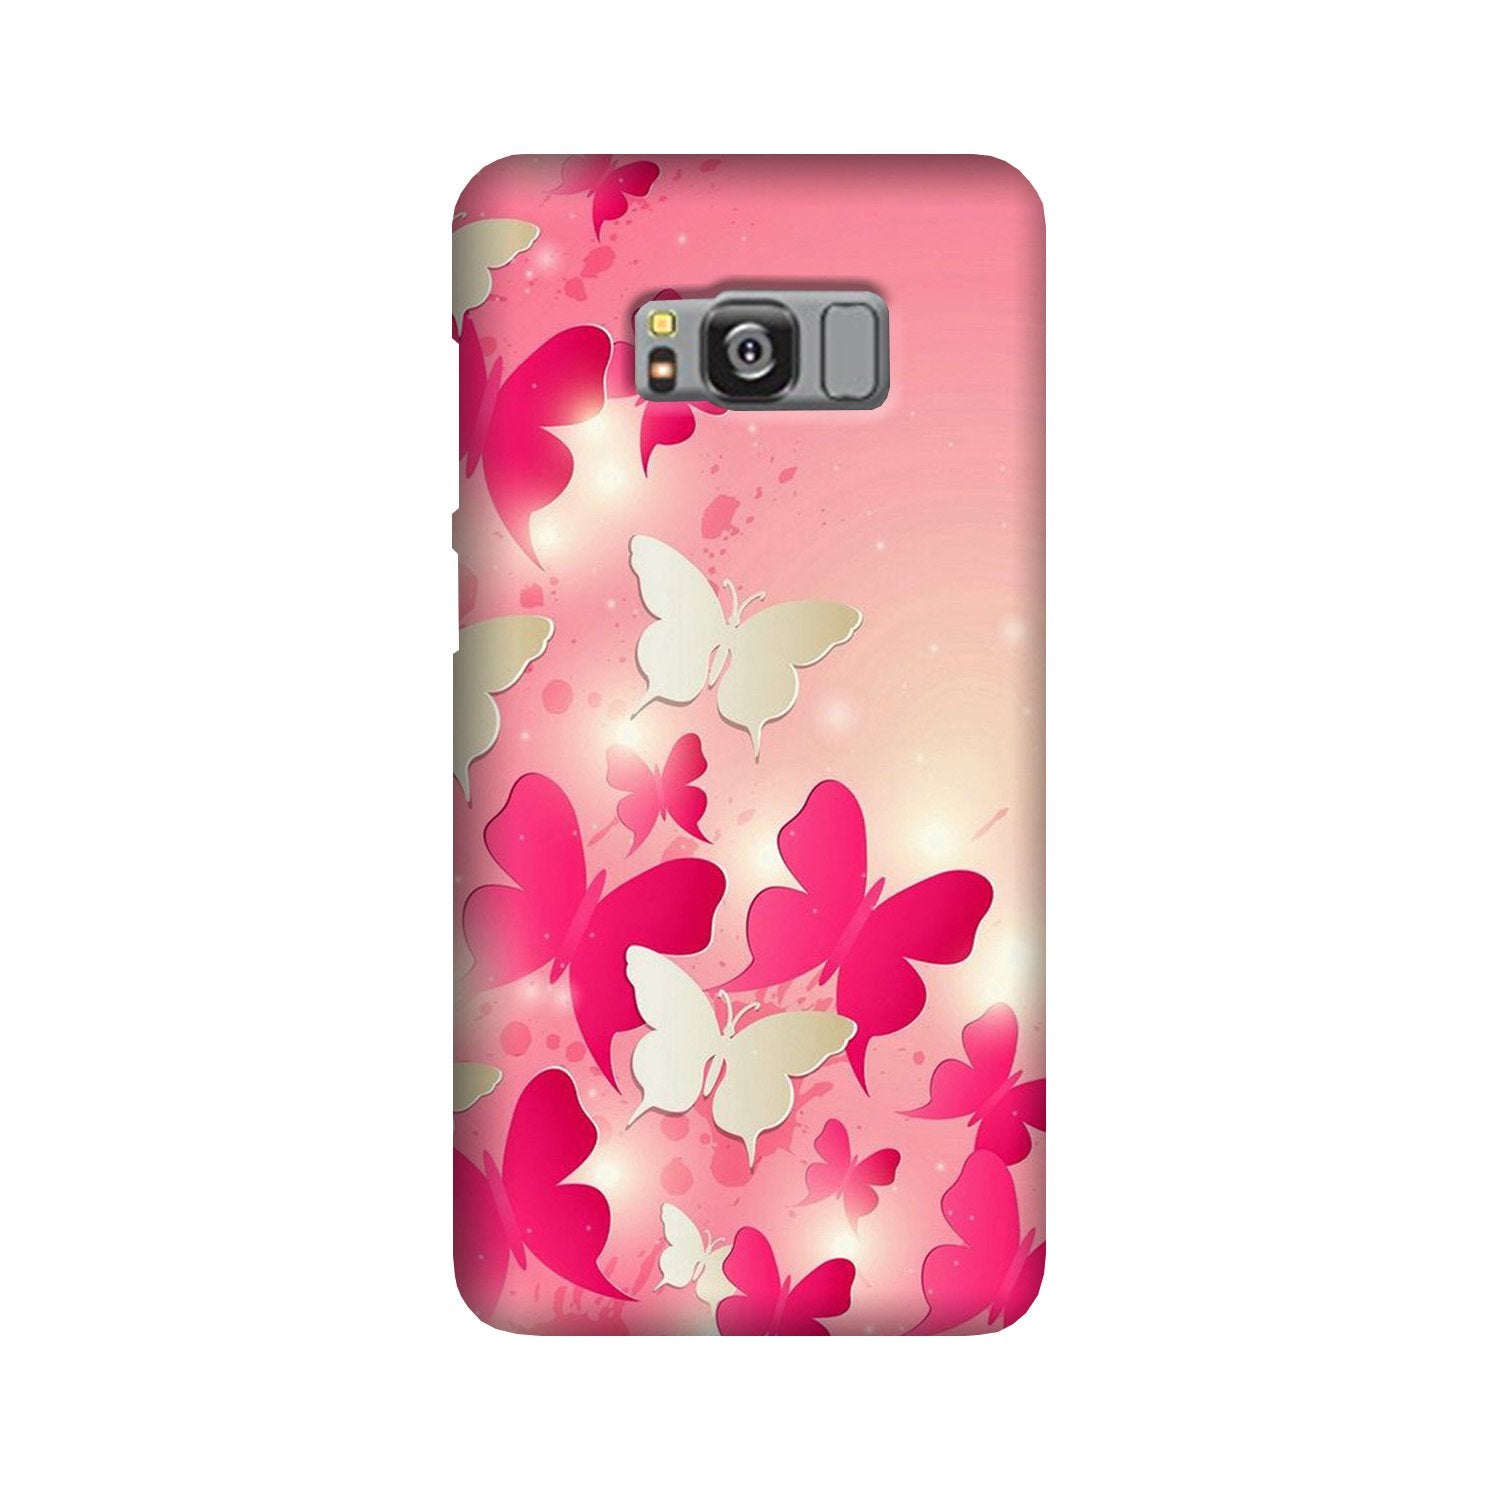 White Pick Butterflies Case for Galaxy S8